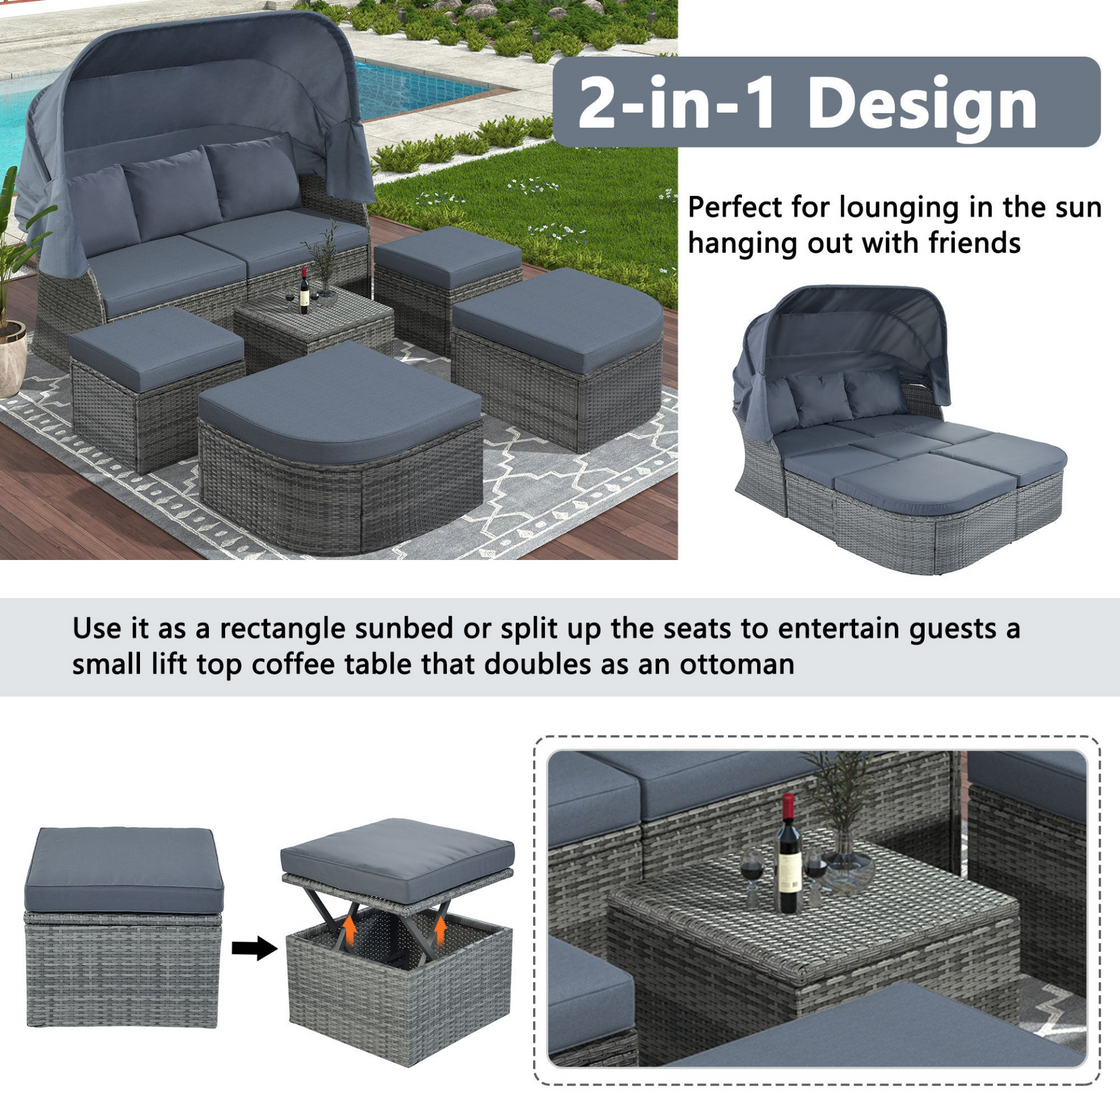 U_STYLE Outdoor Patio Furniture Set Daybed Sunbed with Retractable Canopy - Versatile and Stylish